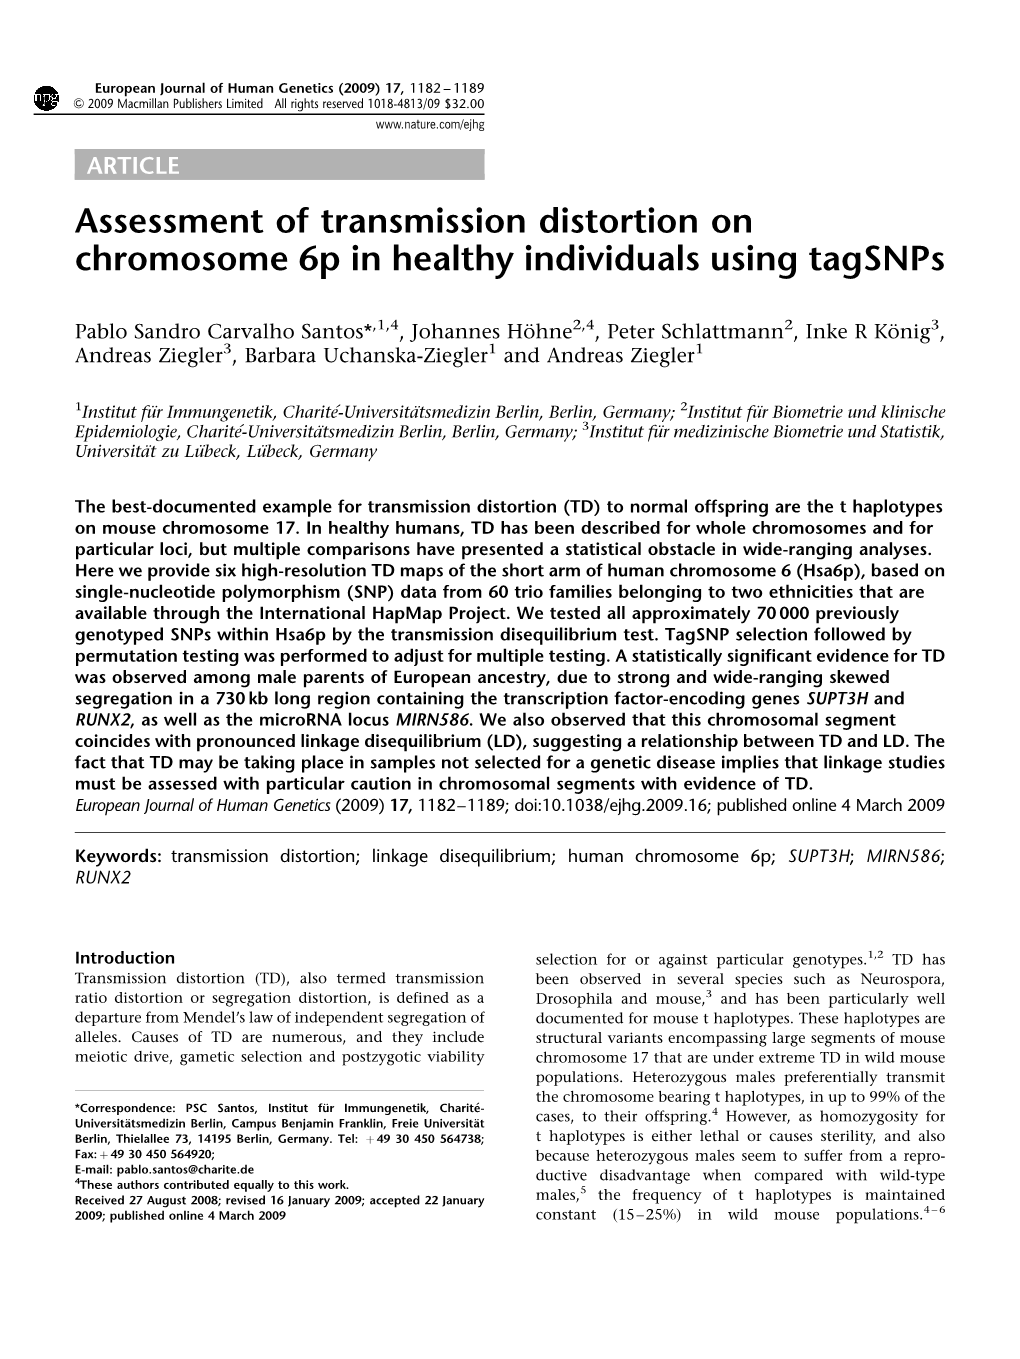 Assessment of Transmission Distortion on Chromosome 6P in Healthy Individuals Using Tagsnps